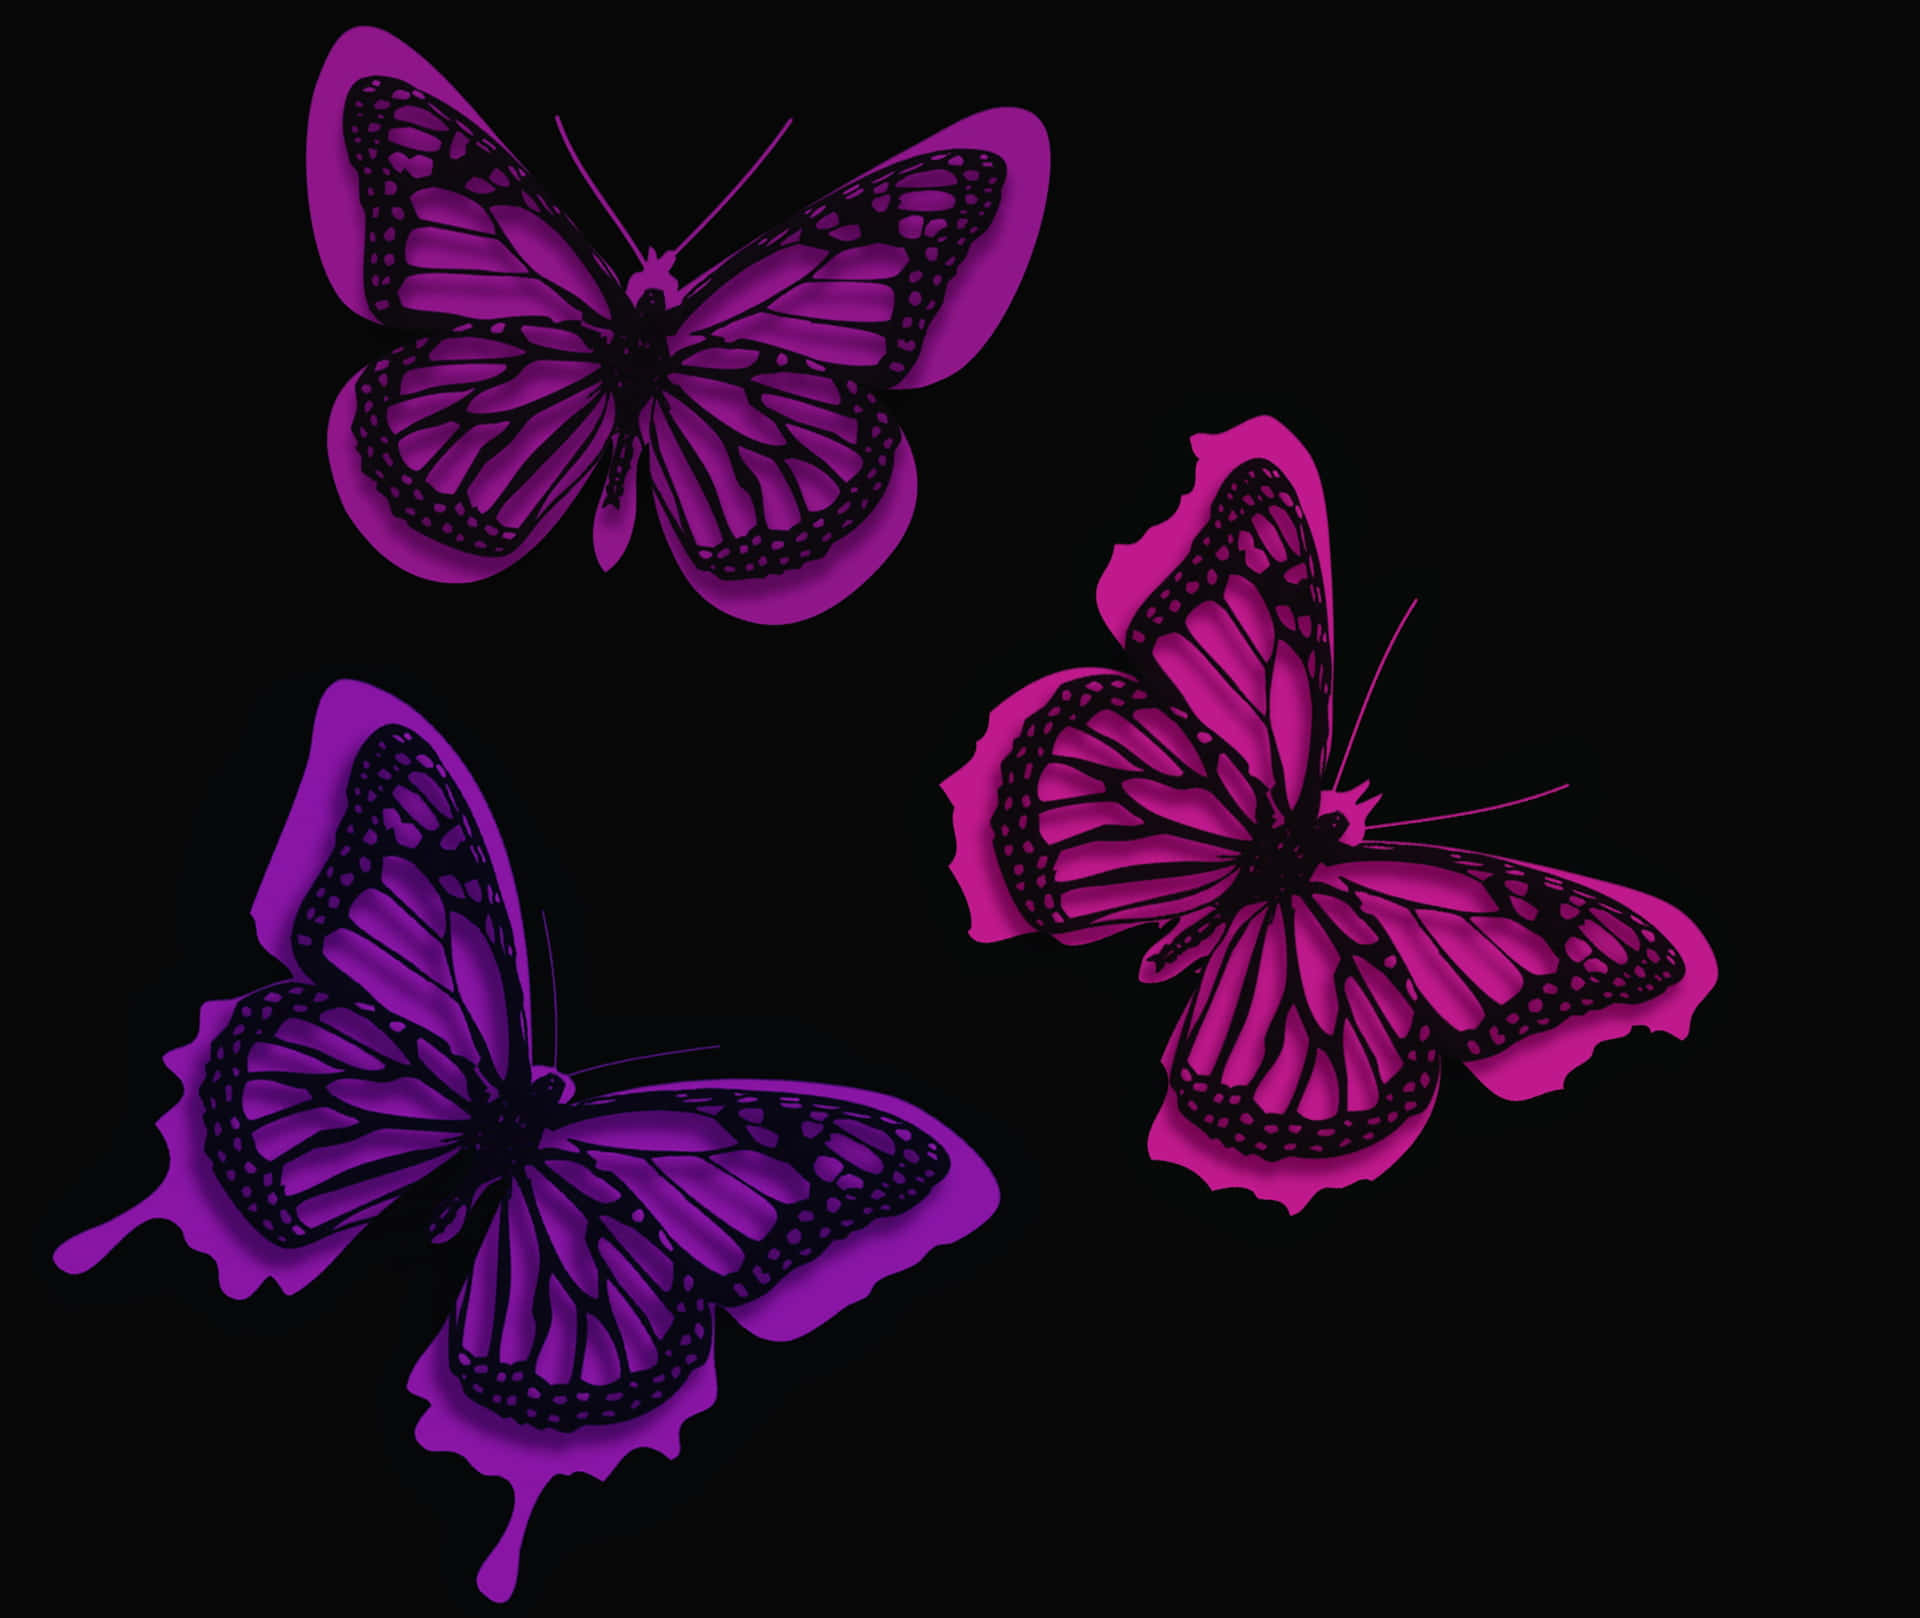 Download Three Purple Butterflies On A Black Background | Wallpapers.com